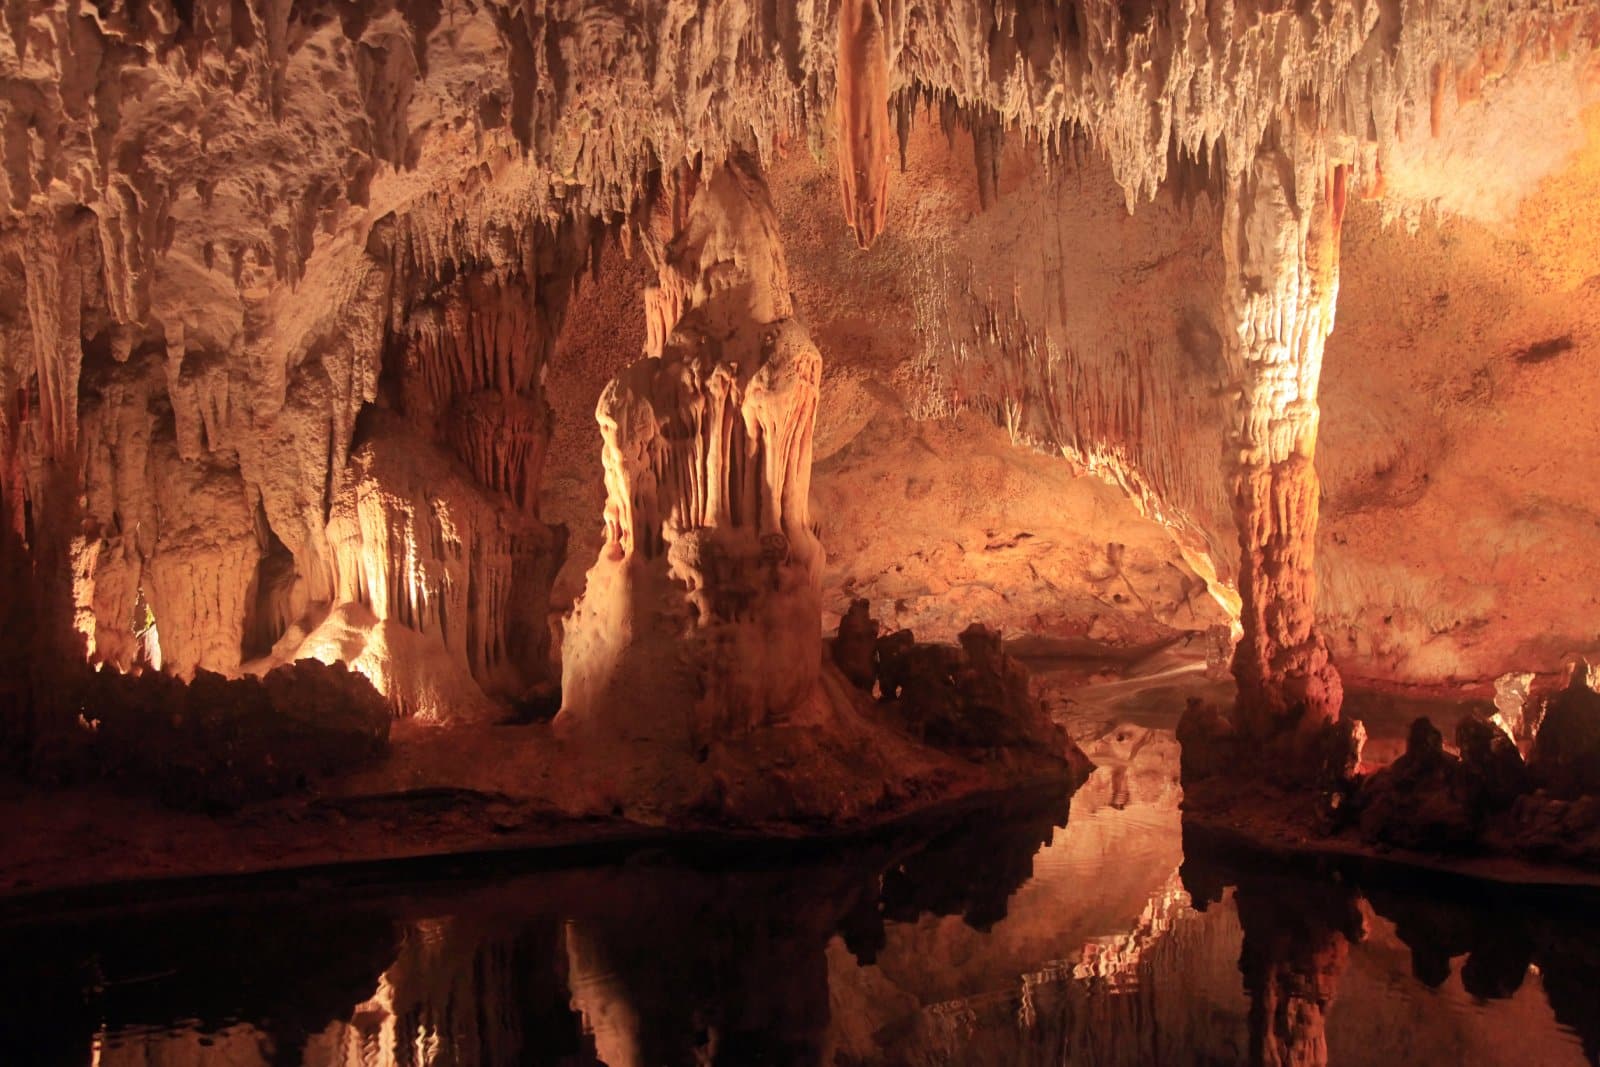 <p class="wp-caption-text">Image Credit: Shutterstock / Bildagentur Zoonar GmbH</p>  <p><span>Cueva de las Maravillas, or Cave of Wonders, located between San Pedro de Macorís and La Romana demonstrates the Dominican Republic’s rich geological and cultural heritage. This extensive cave system, adorned with hundreds of Taino pictographs and petroglyphs, offers visitors a unique opportunity to step back in time and explore the island’s pre-Columbian history. The carefully managed tours through the cave highlight the importance of preserving this archaeological treasure while minimizing the impact on its delicate ecosystem. The stalactites and stalagmites that decorate the cave’s interior create a natural cathedral, inspiring awe and respect for the natural processes that have shaped this landscape over millennia. The park’s efforts to educate visitors about the significance of these ancient artworks and the need to protect such sites underscore the Dominican Republic’s commitment to cultural conservation and eco-tourism. Cueva de las Maravillas serves as a model for how natural and historical sites can be made accessible to the public to ensure their preservation for future generations.</span></p>